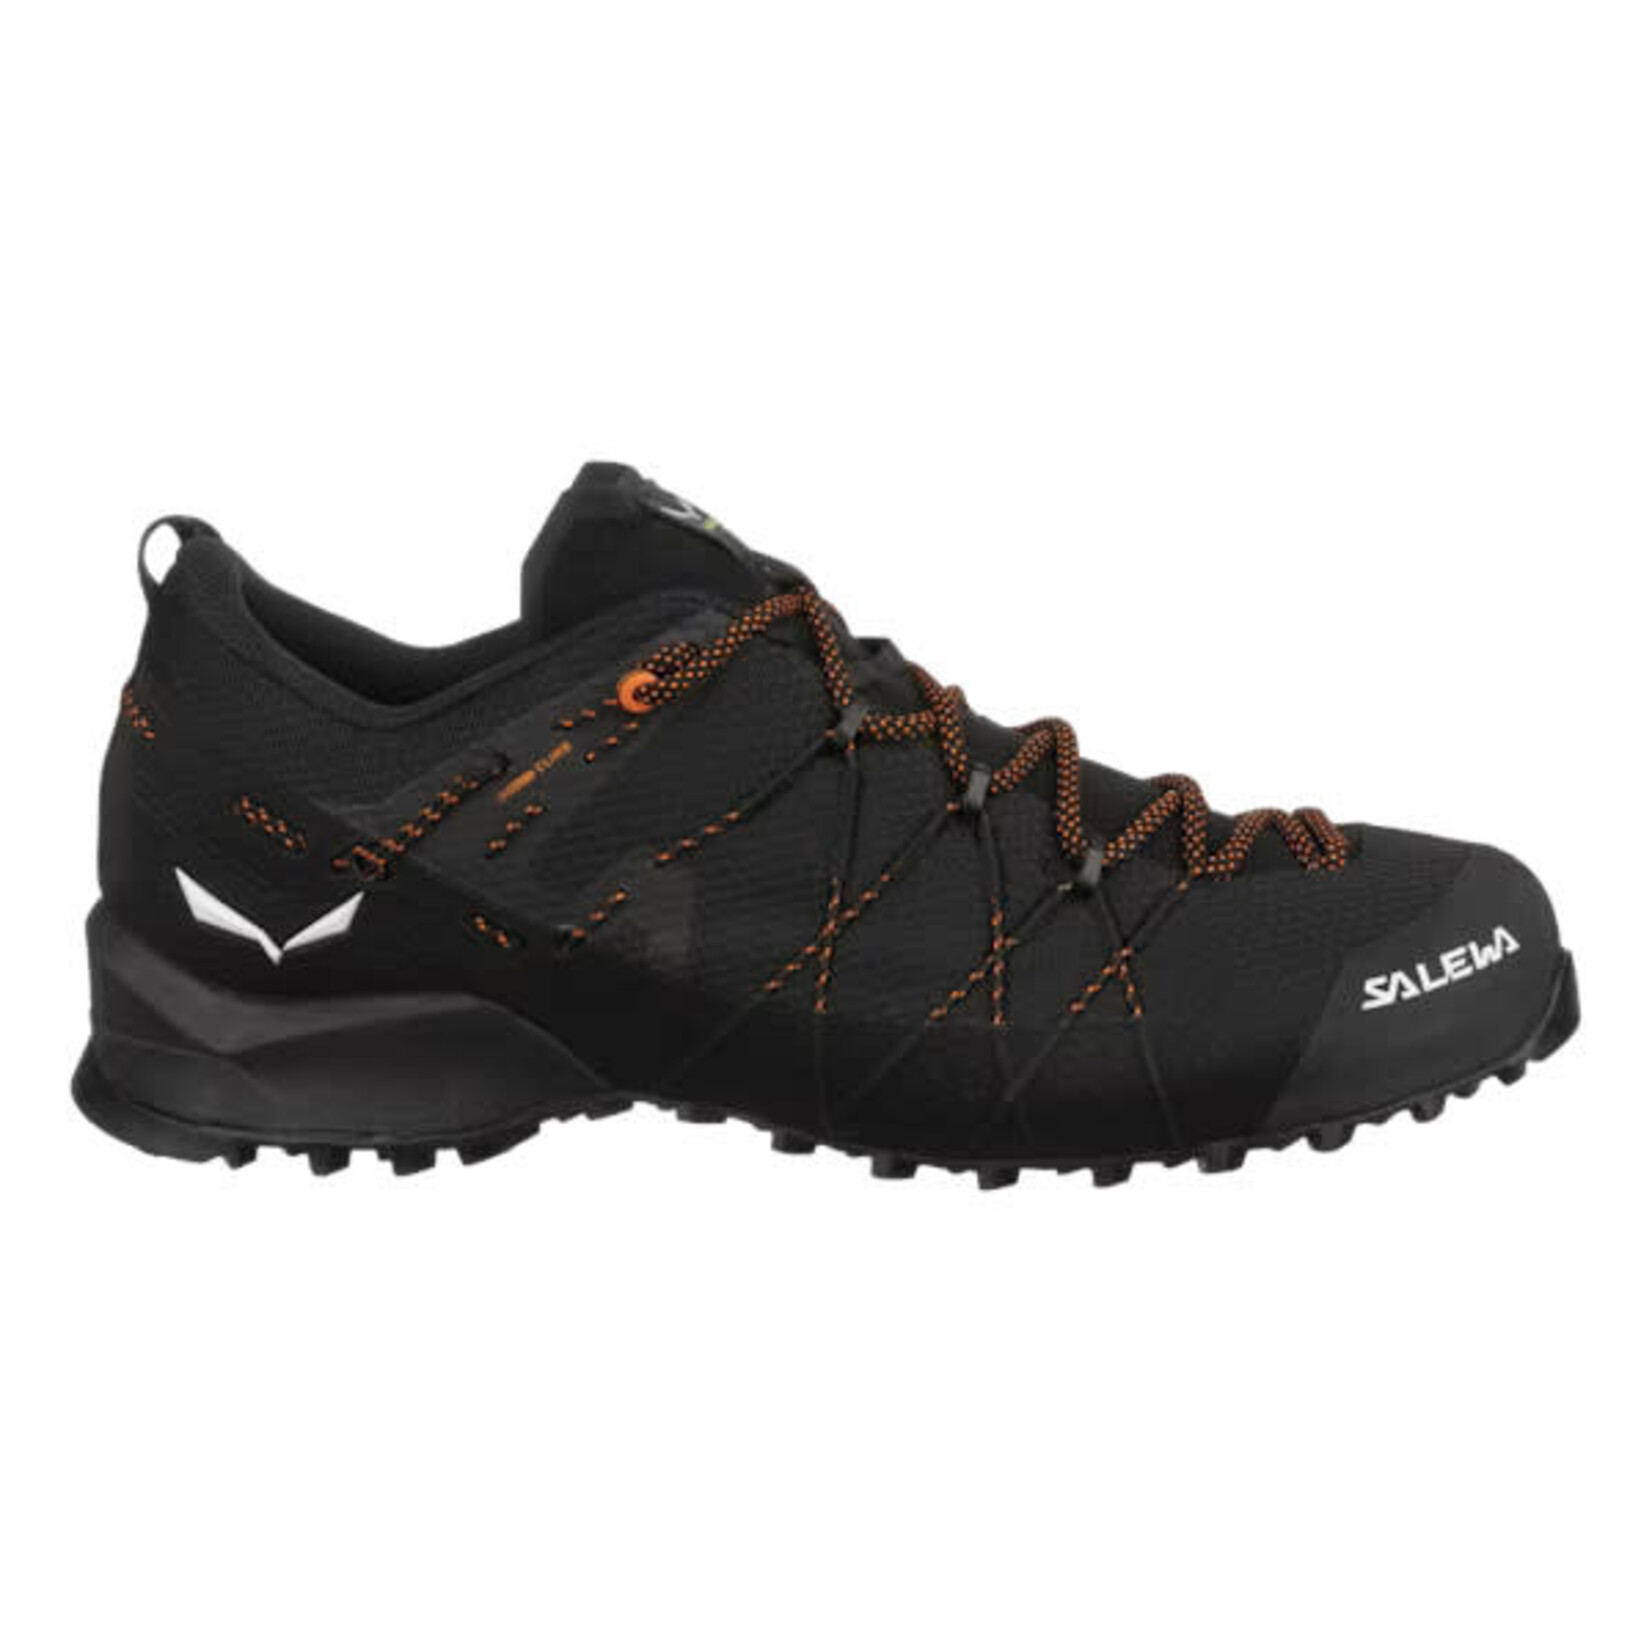 Salewa Wildfire 2 (Souliers d’approche pour homme)